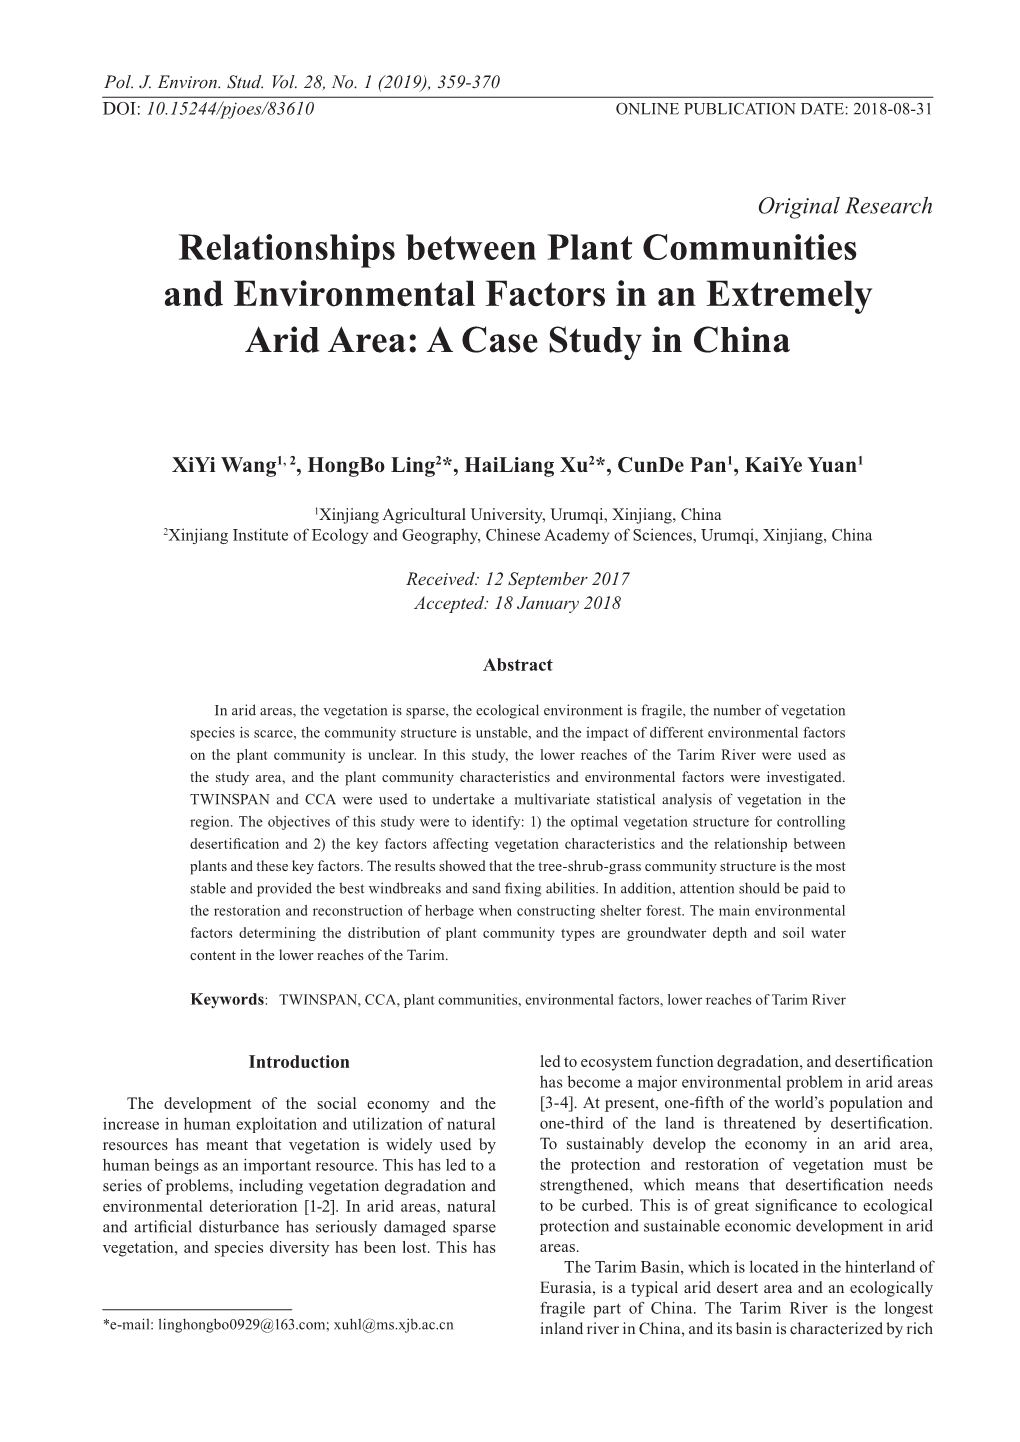 Relationships Between Plant Communities and Environmental Factors in an Extremely Arid Area: a Case Study in China